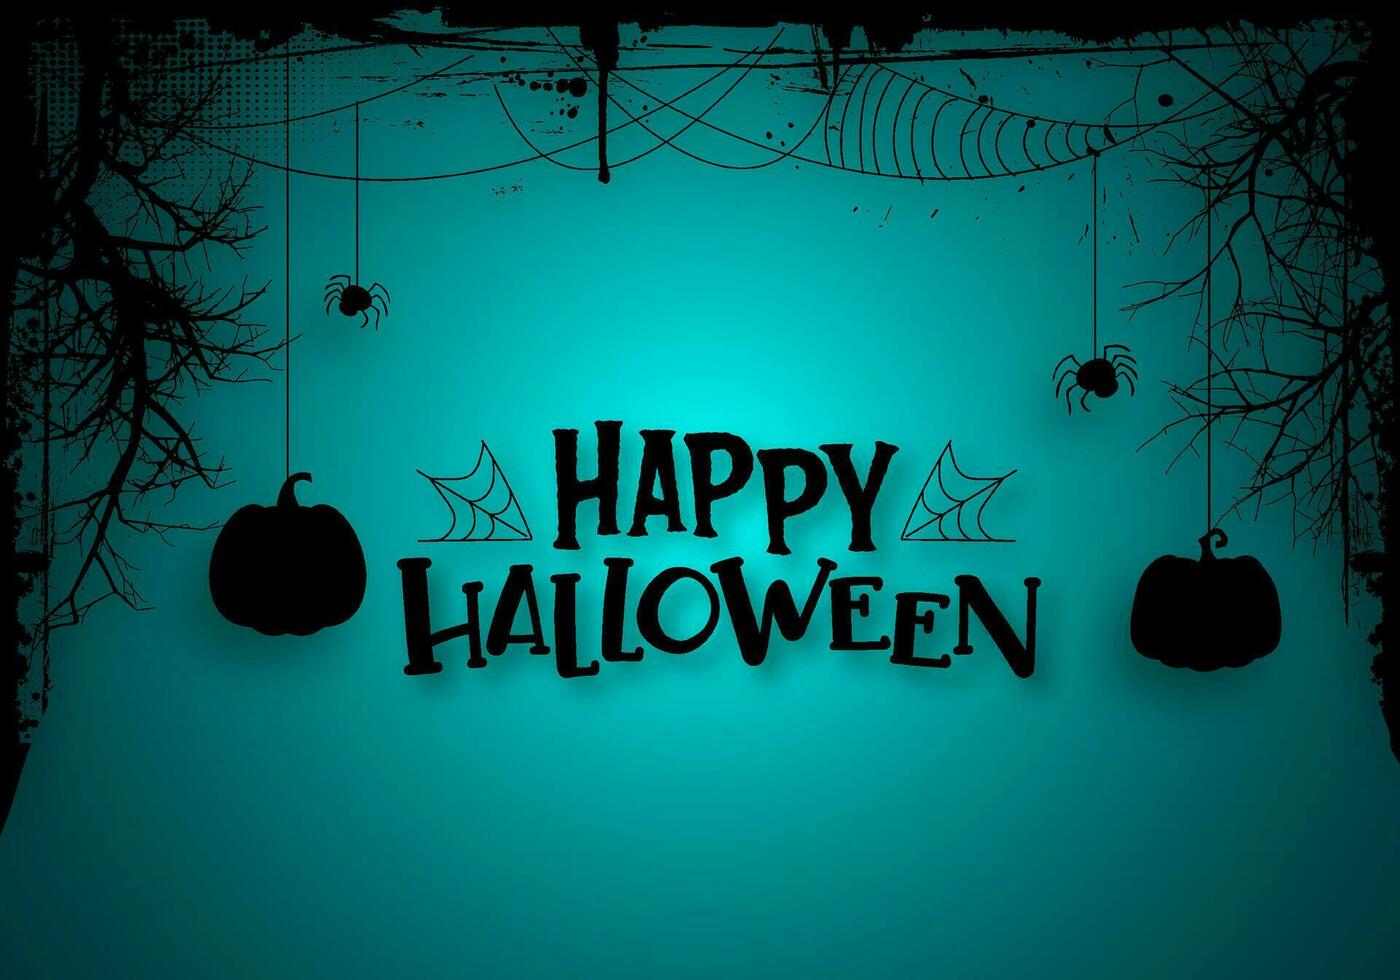 Happy halloween background with grunge border and creepy dead tree with spider webs vector